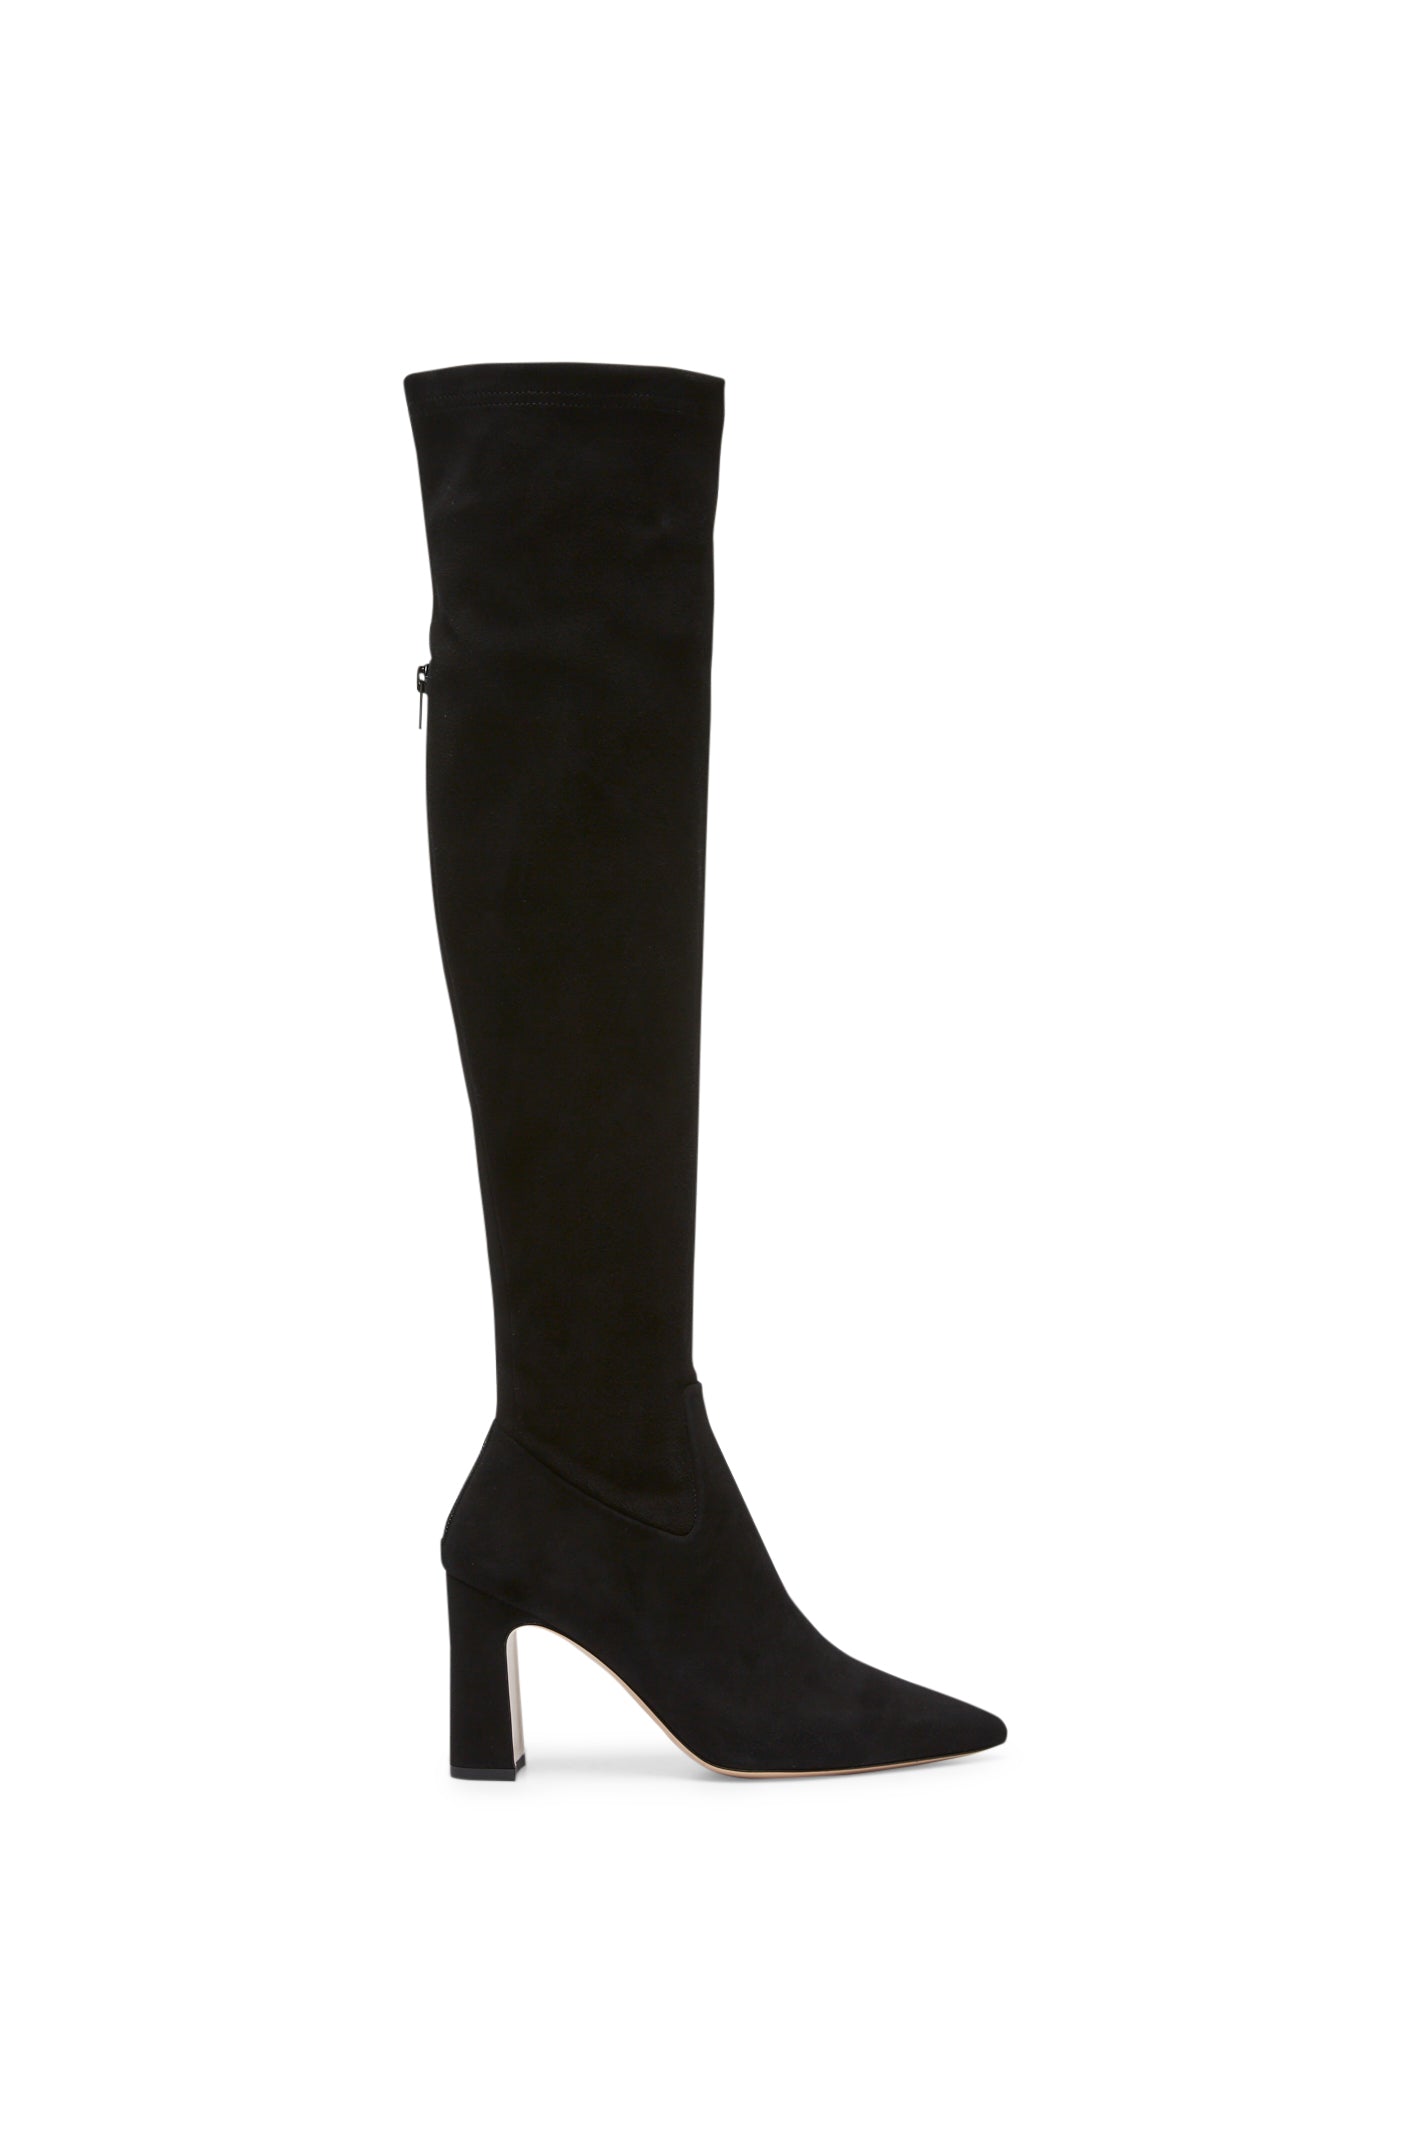 STRETCH SUEDE OVER THE KNEE BOOT 8.5 - BLACK - Scanlan Theodore